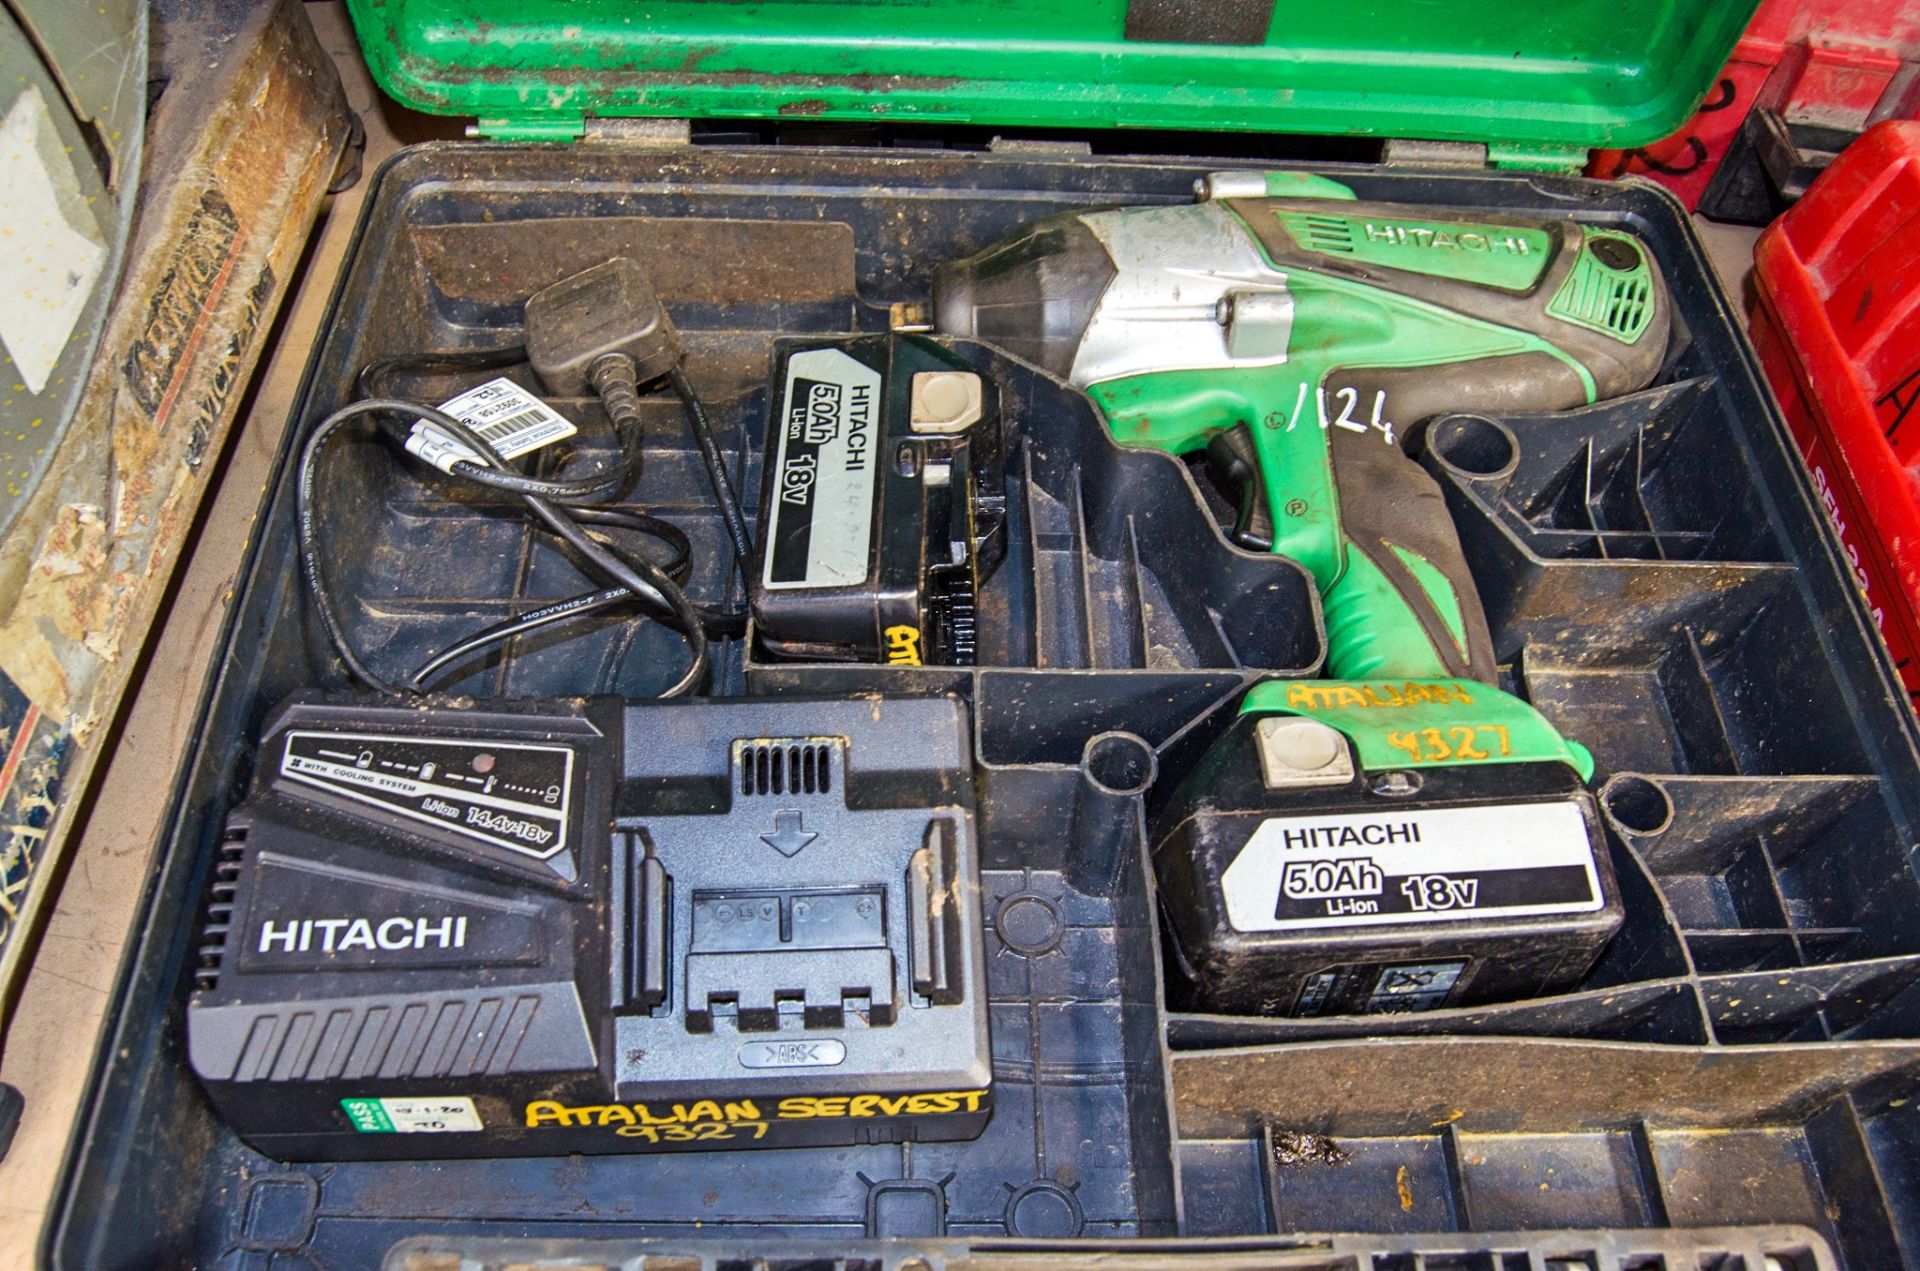 Hitachi WR18DSHL 18v cordless 1/2 inch drive impact gun c/w 2 batteries, charger and carry case